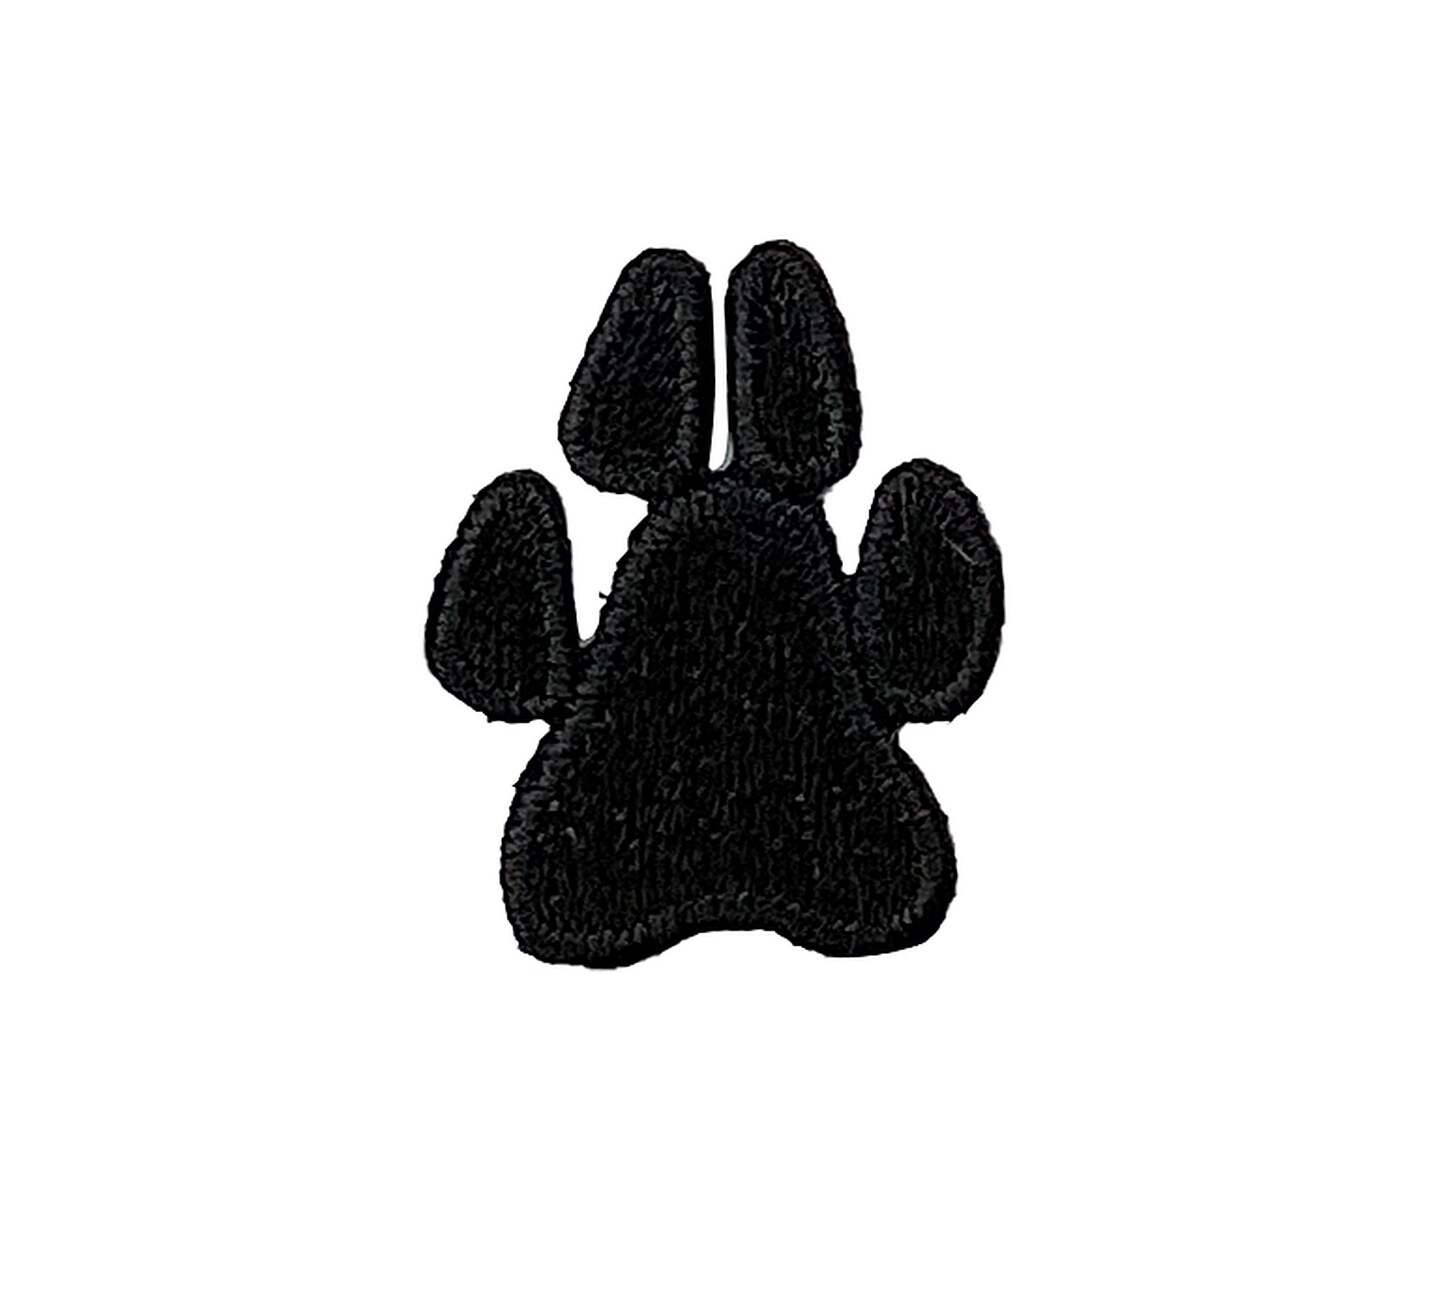 Black Paw Print, Pets, Miniature Patches, Embroidered, Iron on Patch